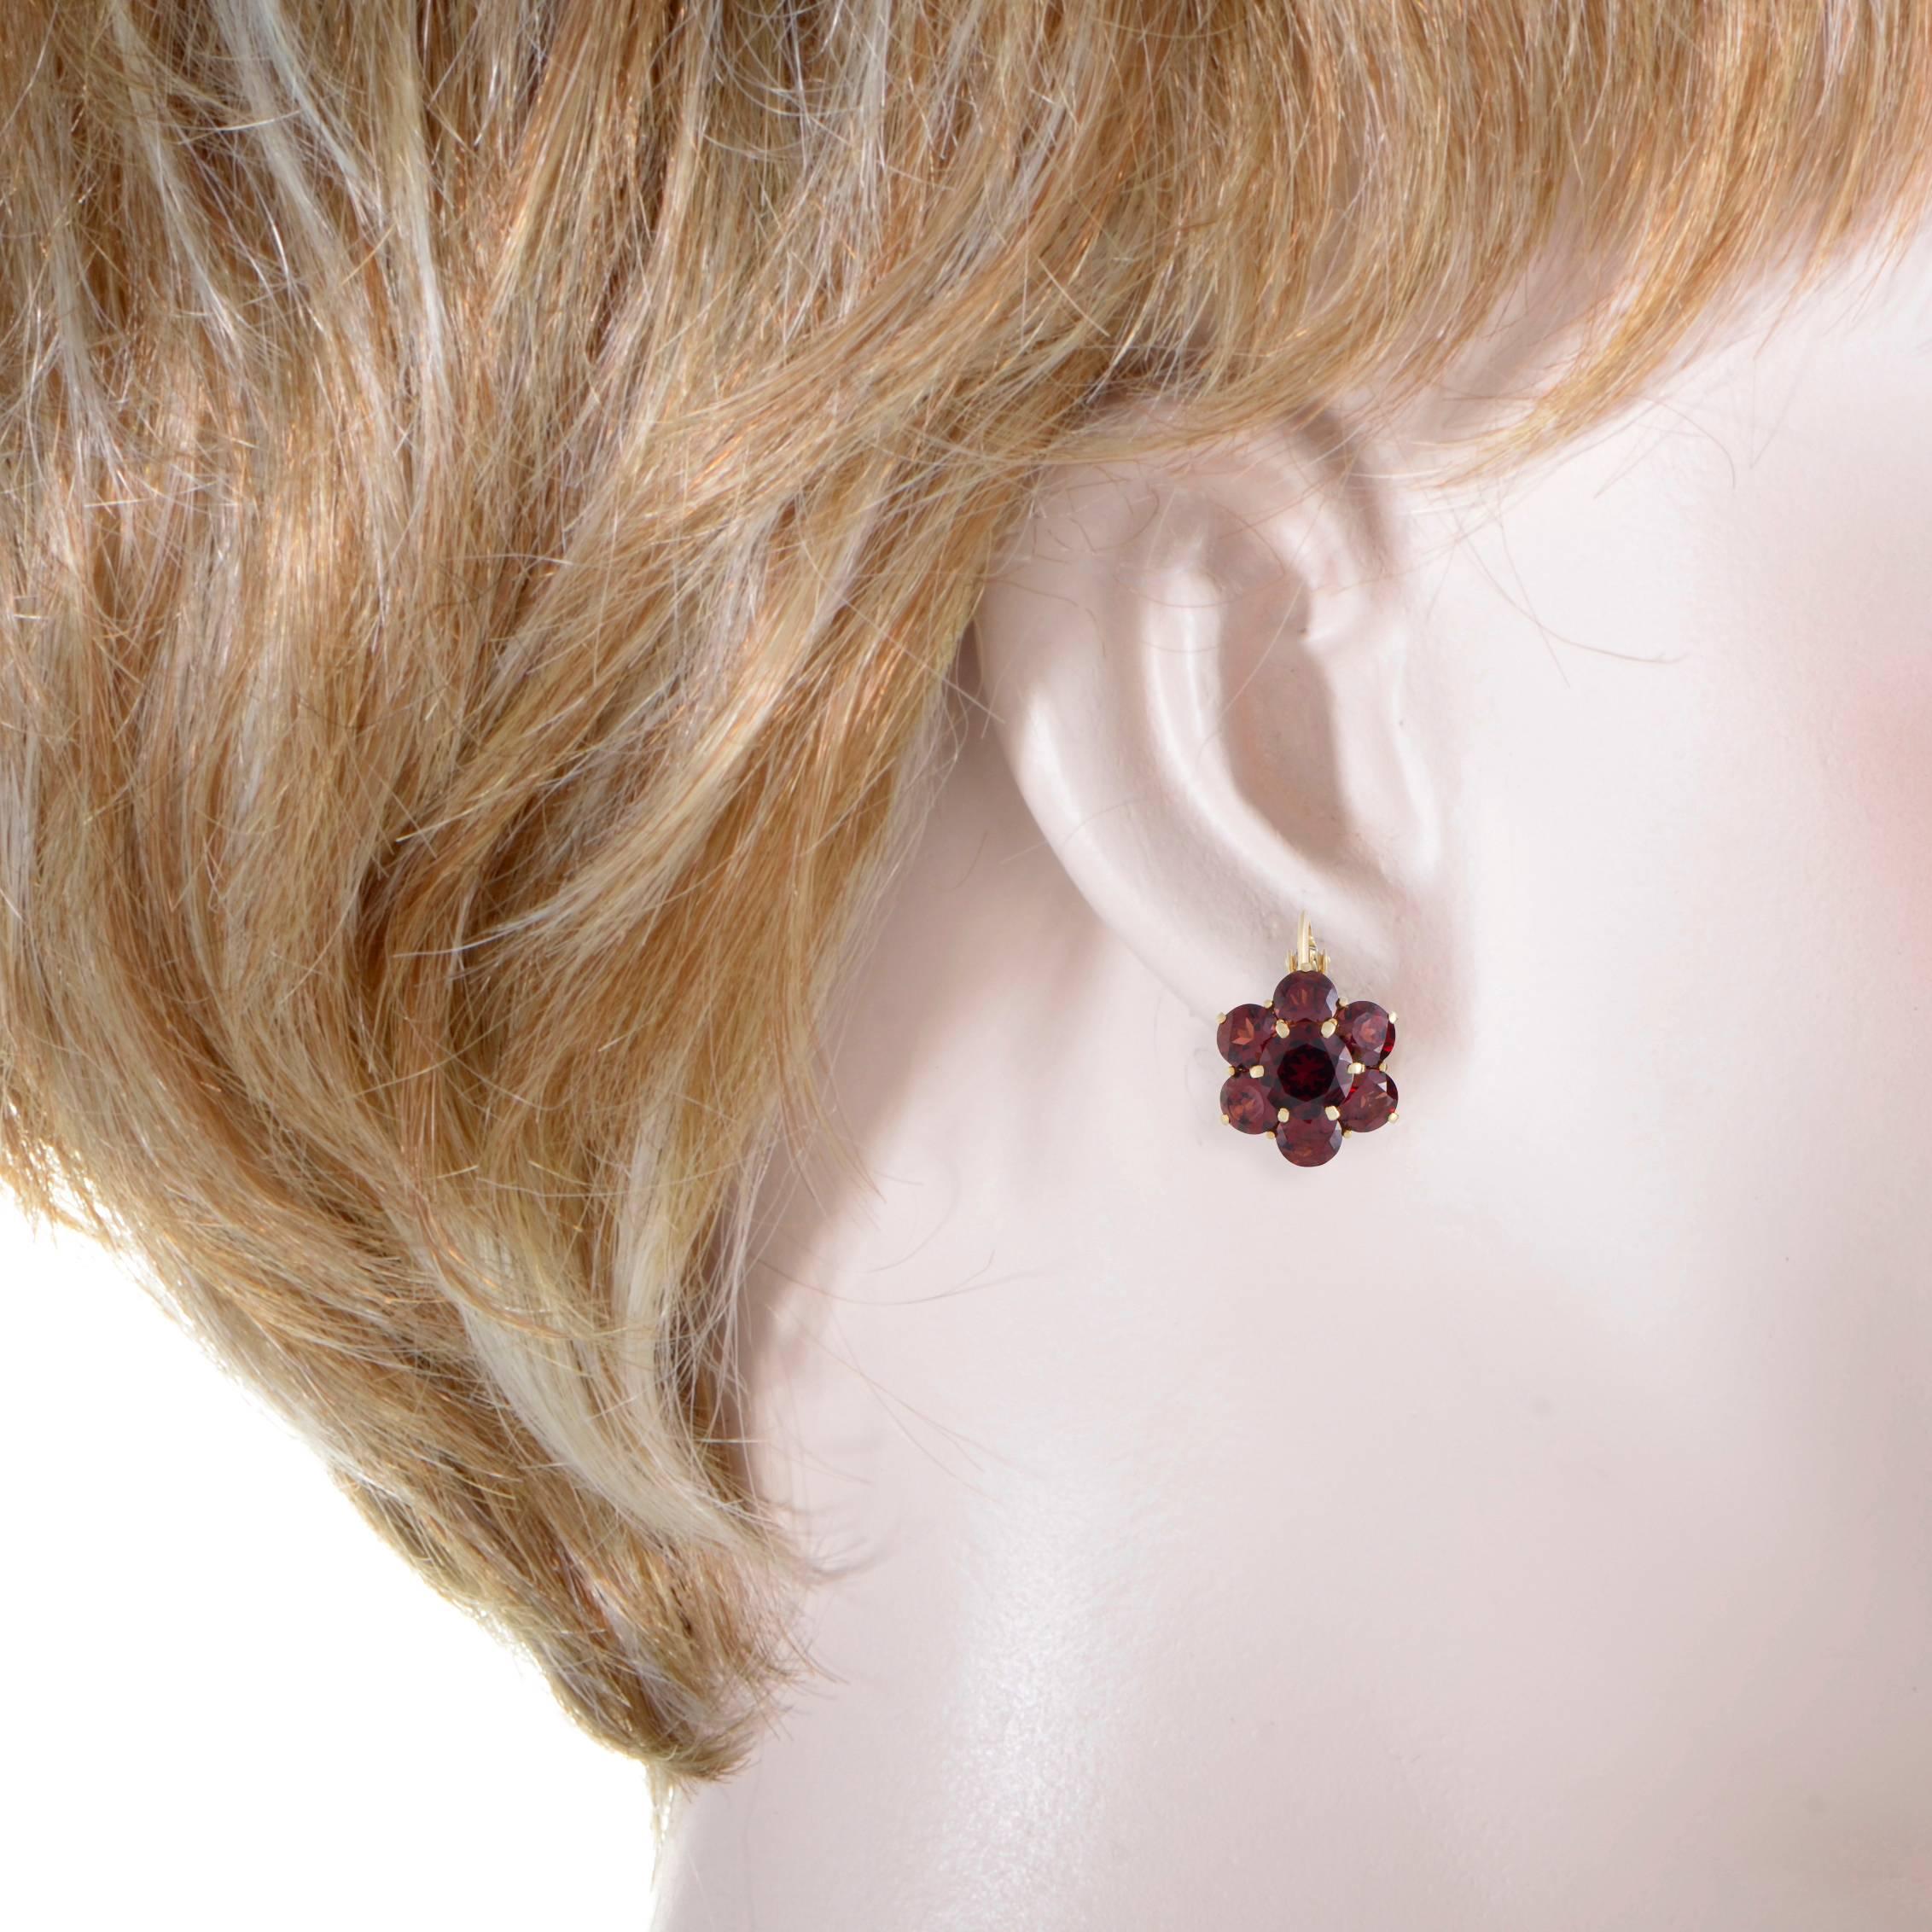 Delightfully dainty and feminine, these sublime earrings are expertly crafted from radiant 18K yellow gold and depict lovely flowers. The earrings are set with eye-catching garnets.
